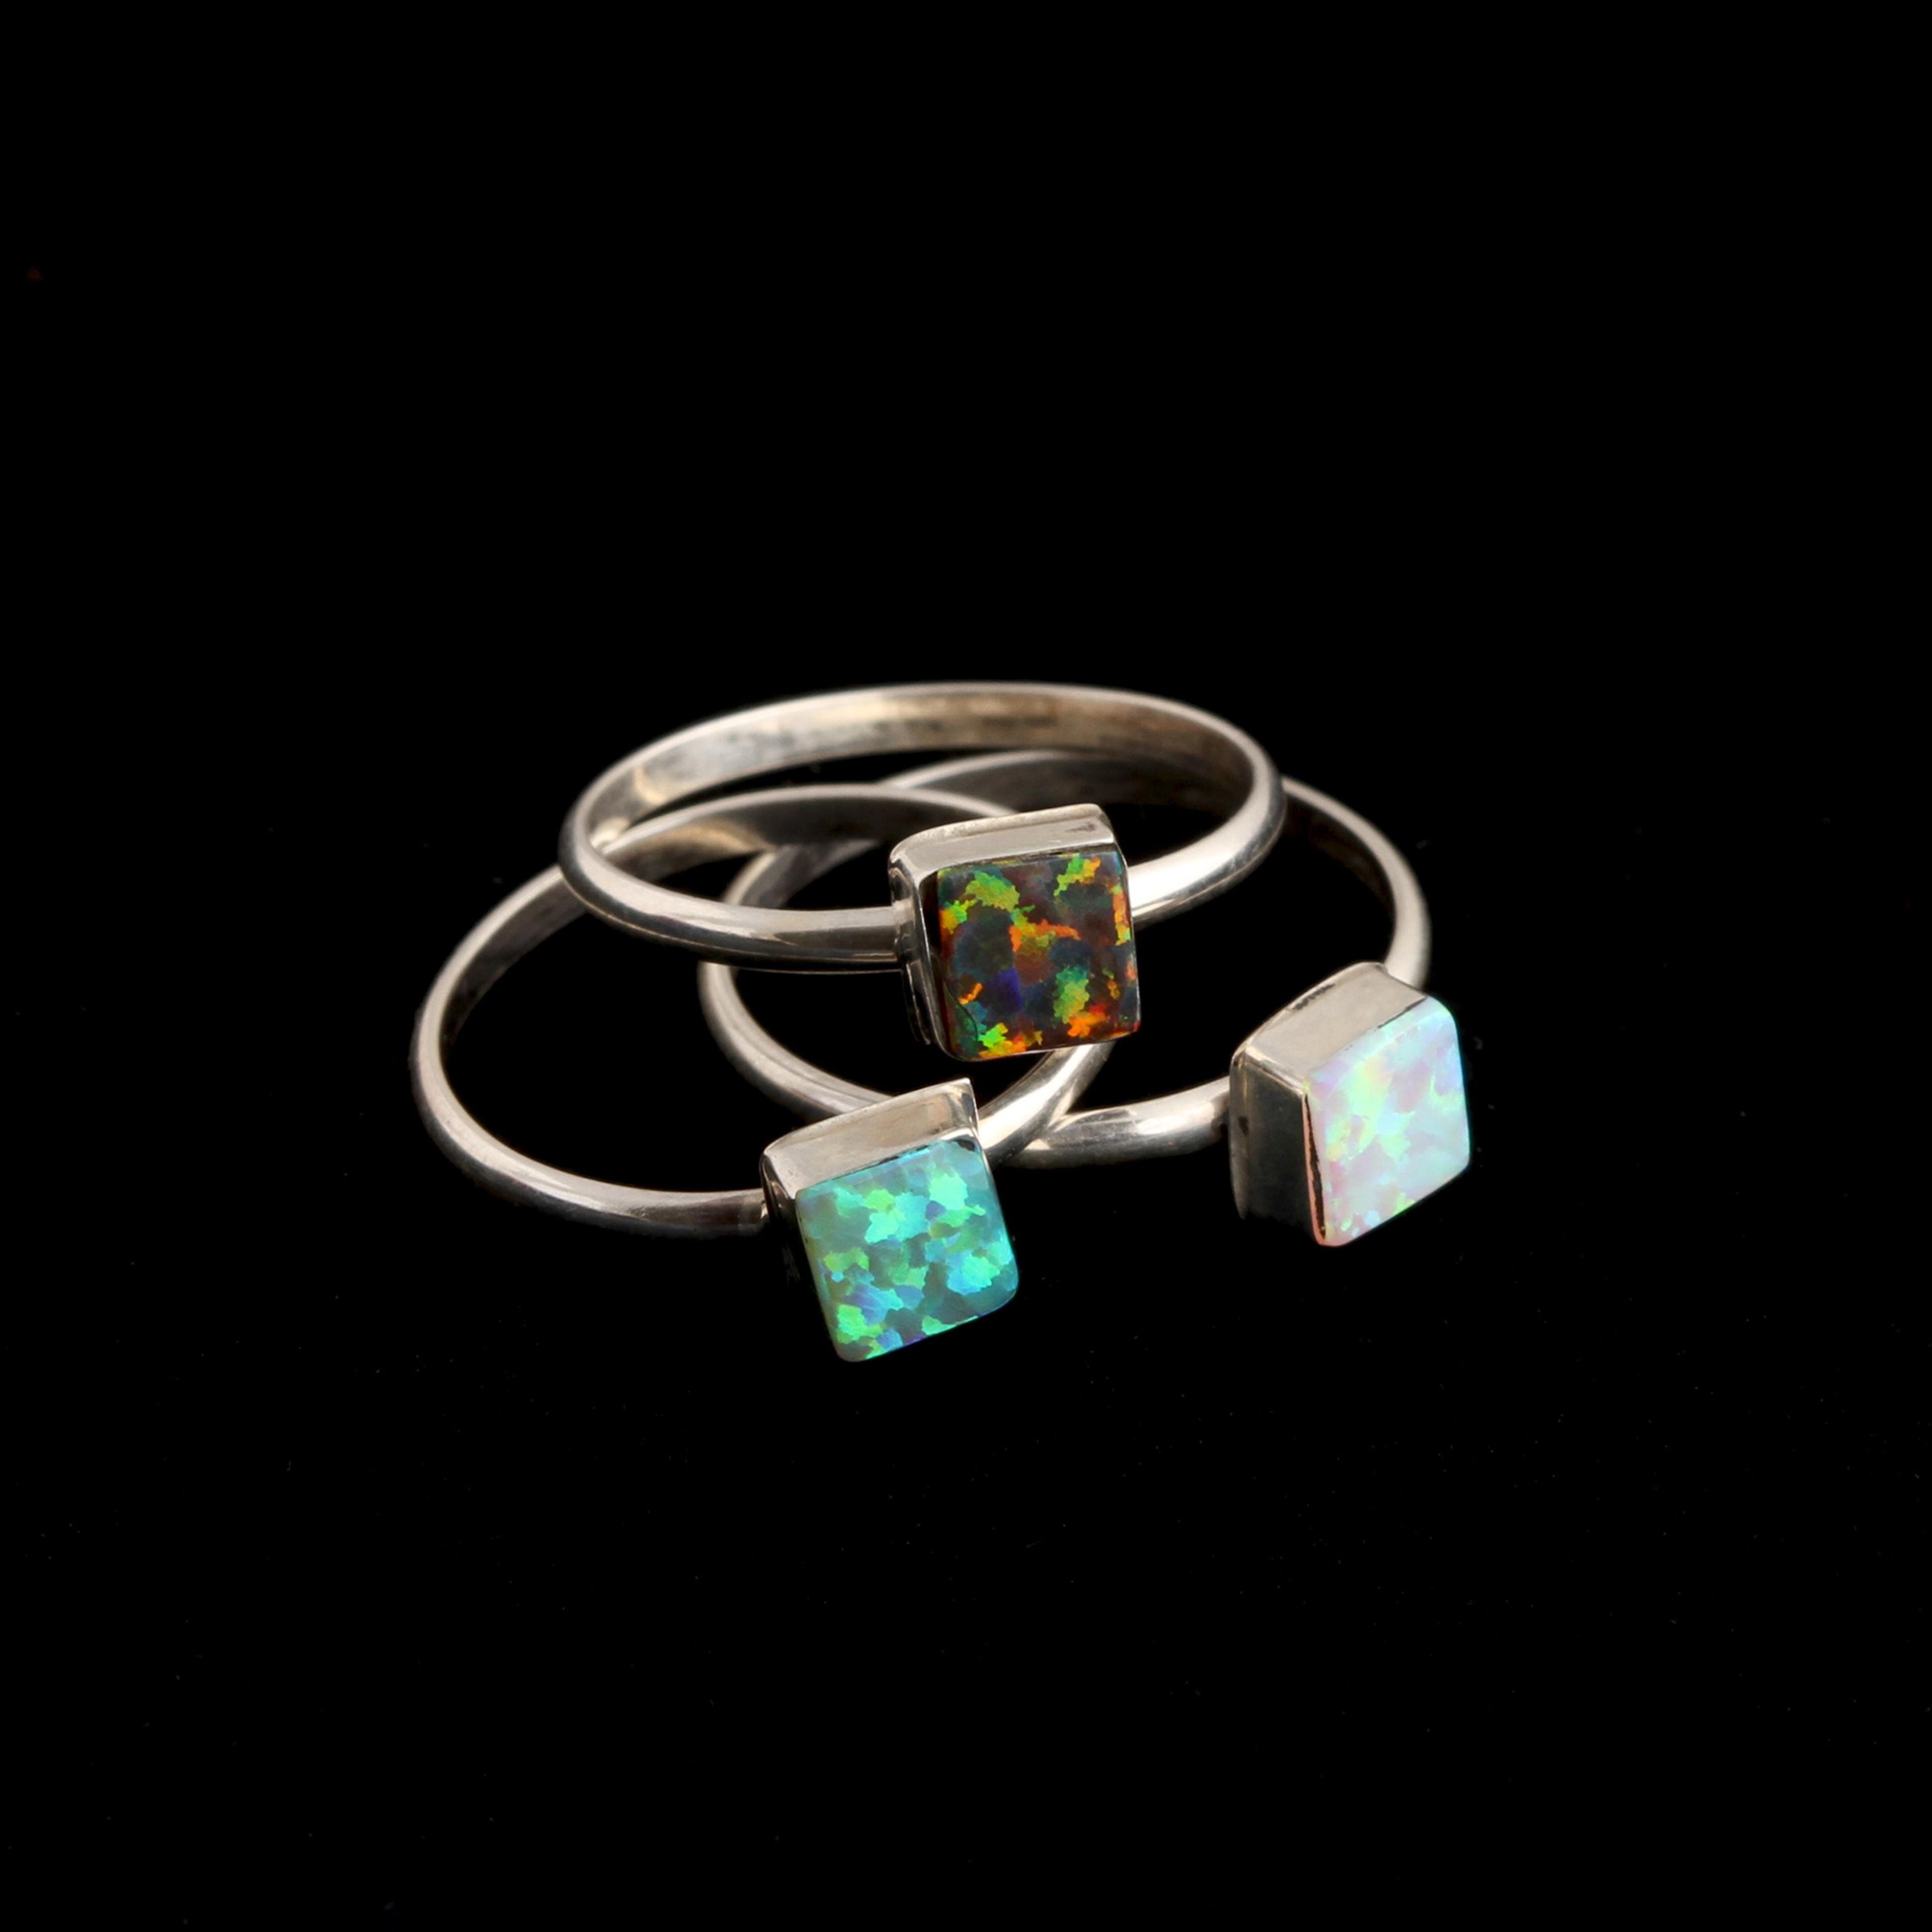 Equilateral Opal Ring